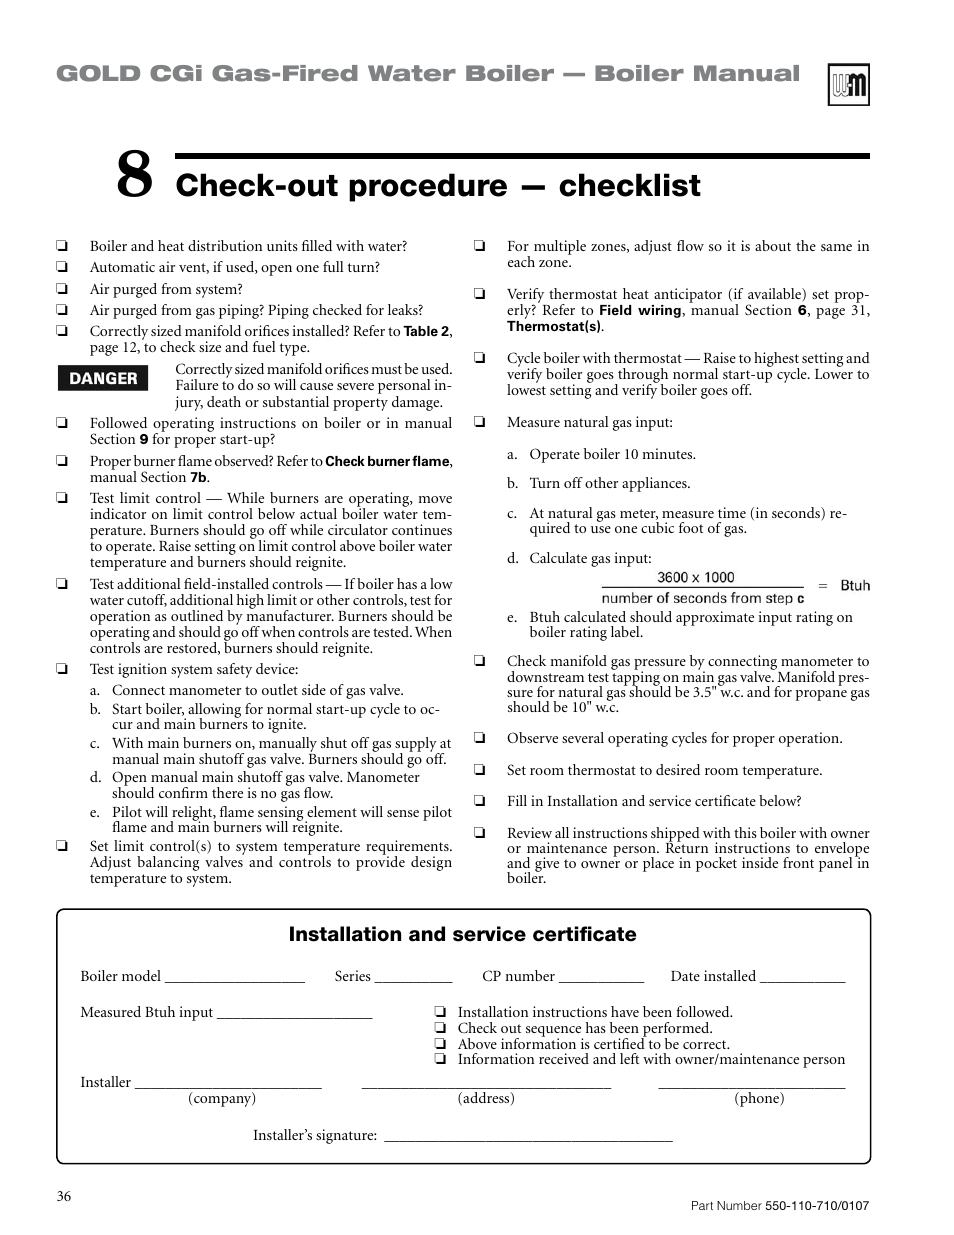 Check-out procedure — checklist, Gold cgi gas-fired water ...